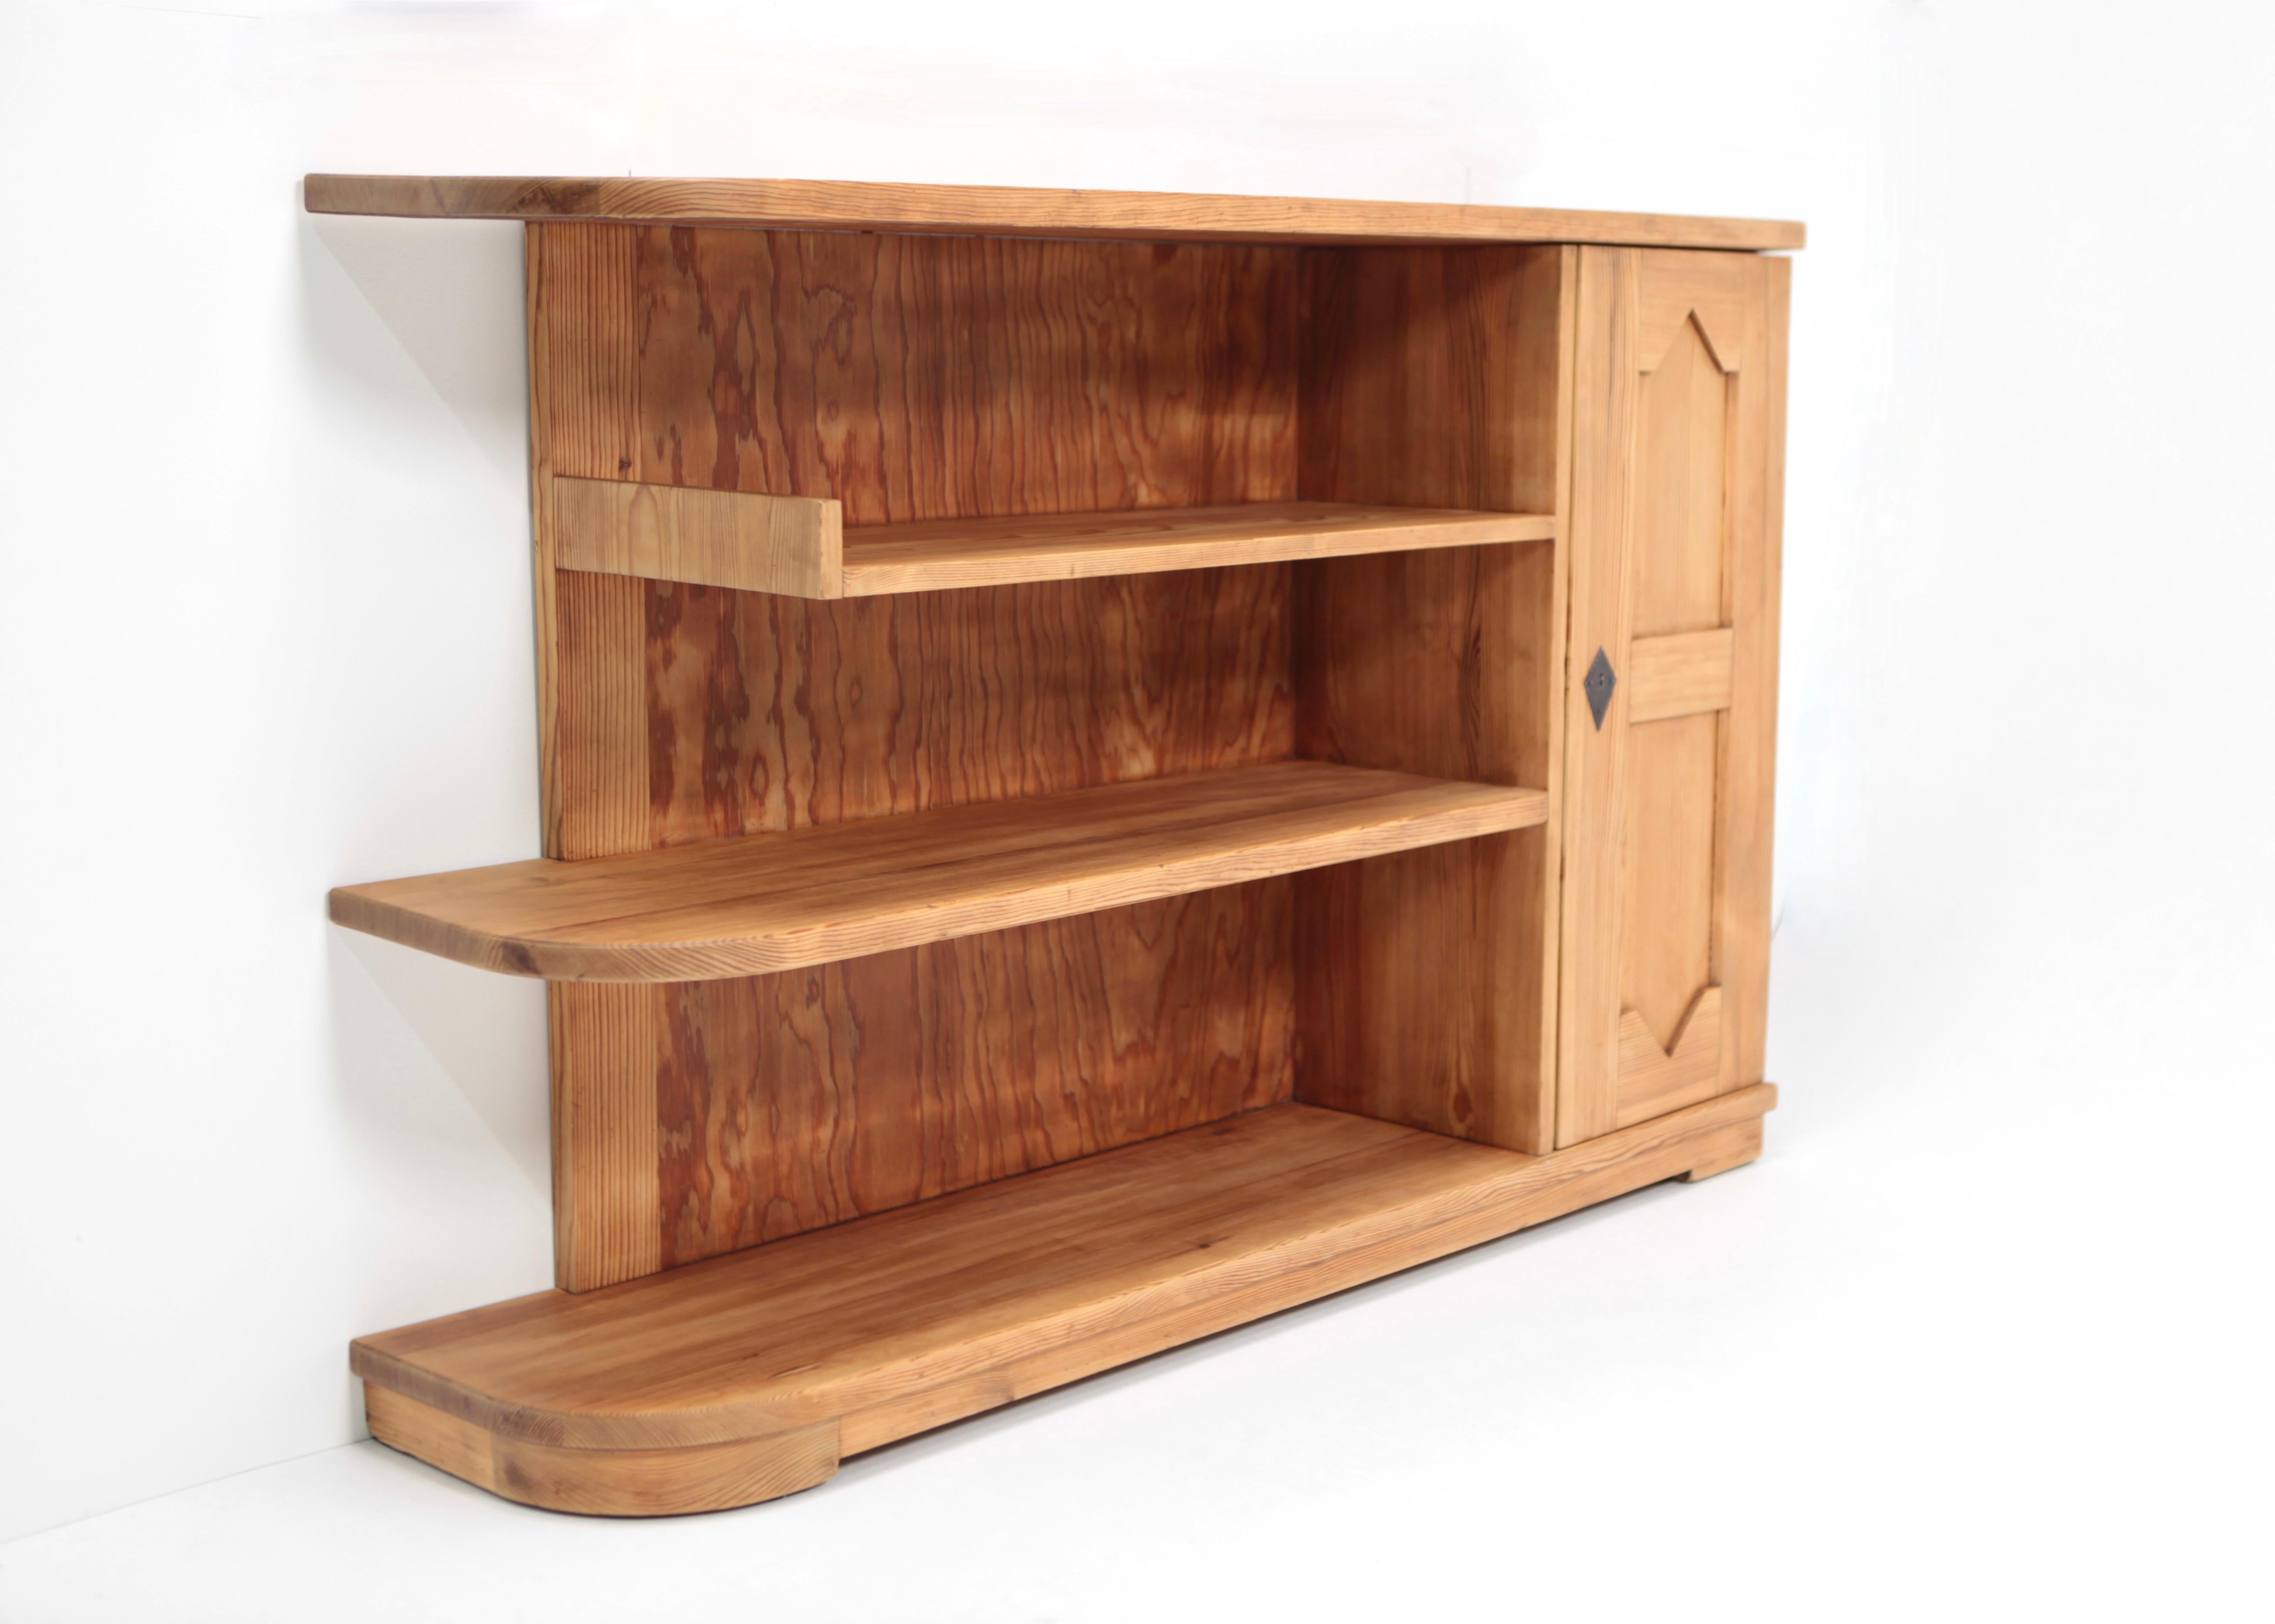 Axel Einar Hjorth, 'Lovö' Bookcase, Acid Stained Pine, Executed by NK in 1939 7